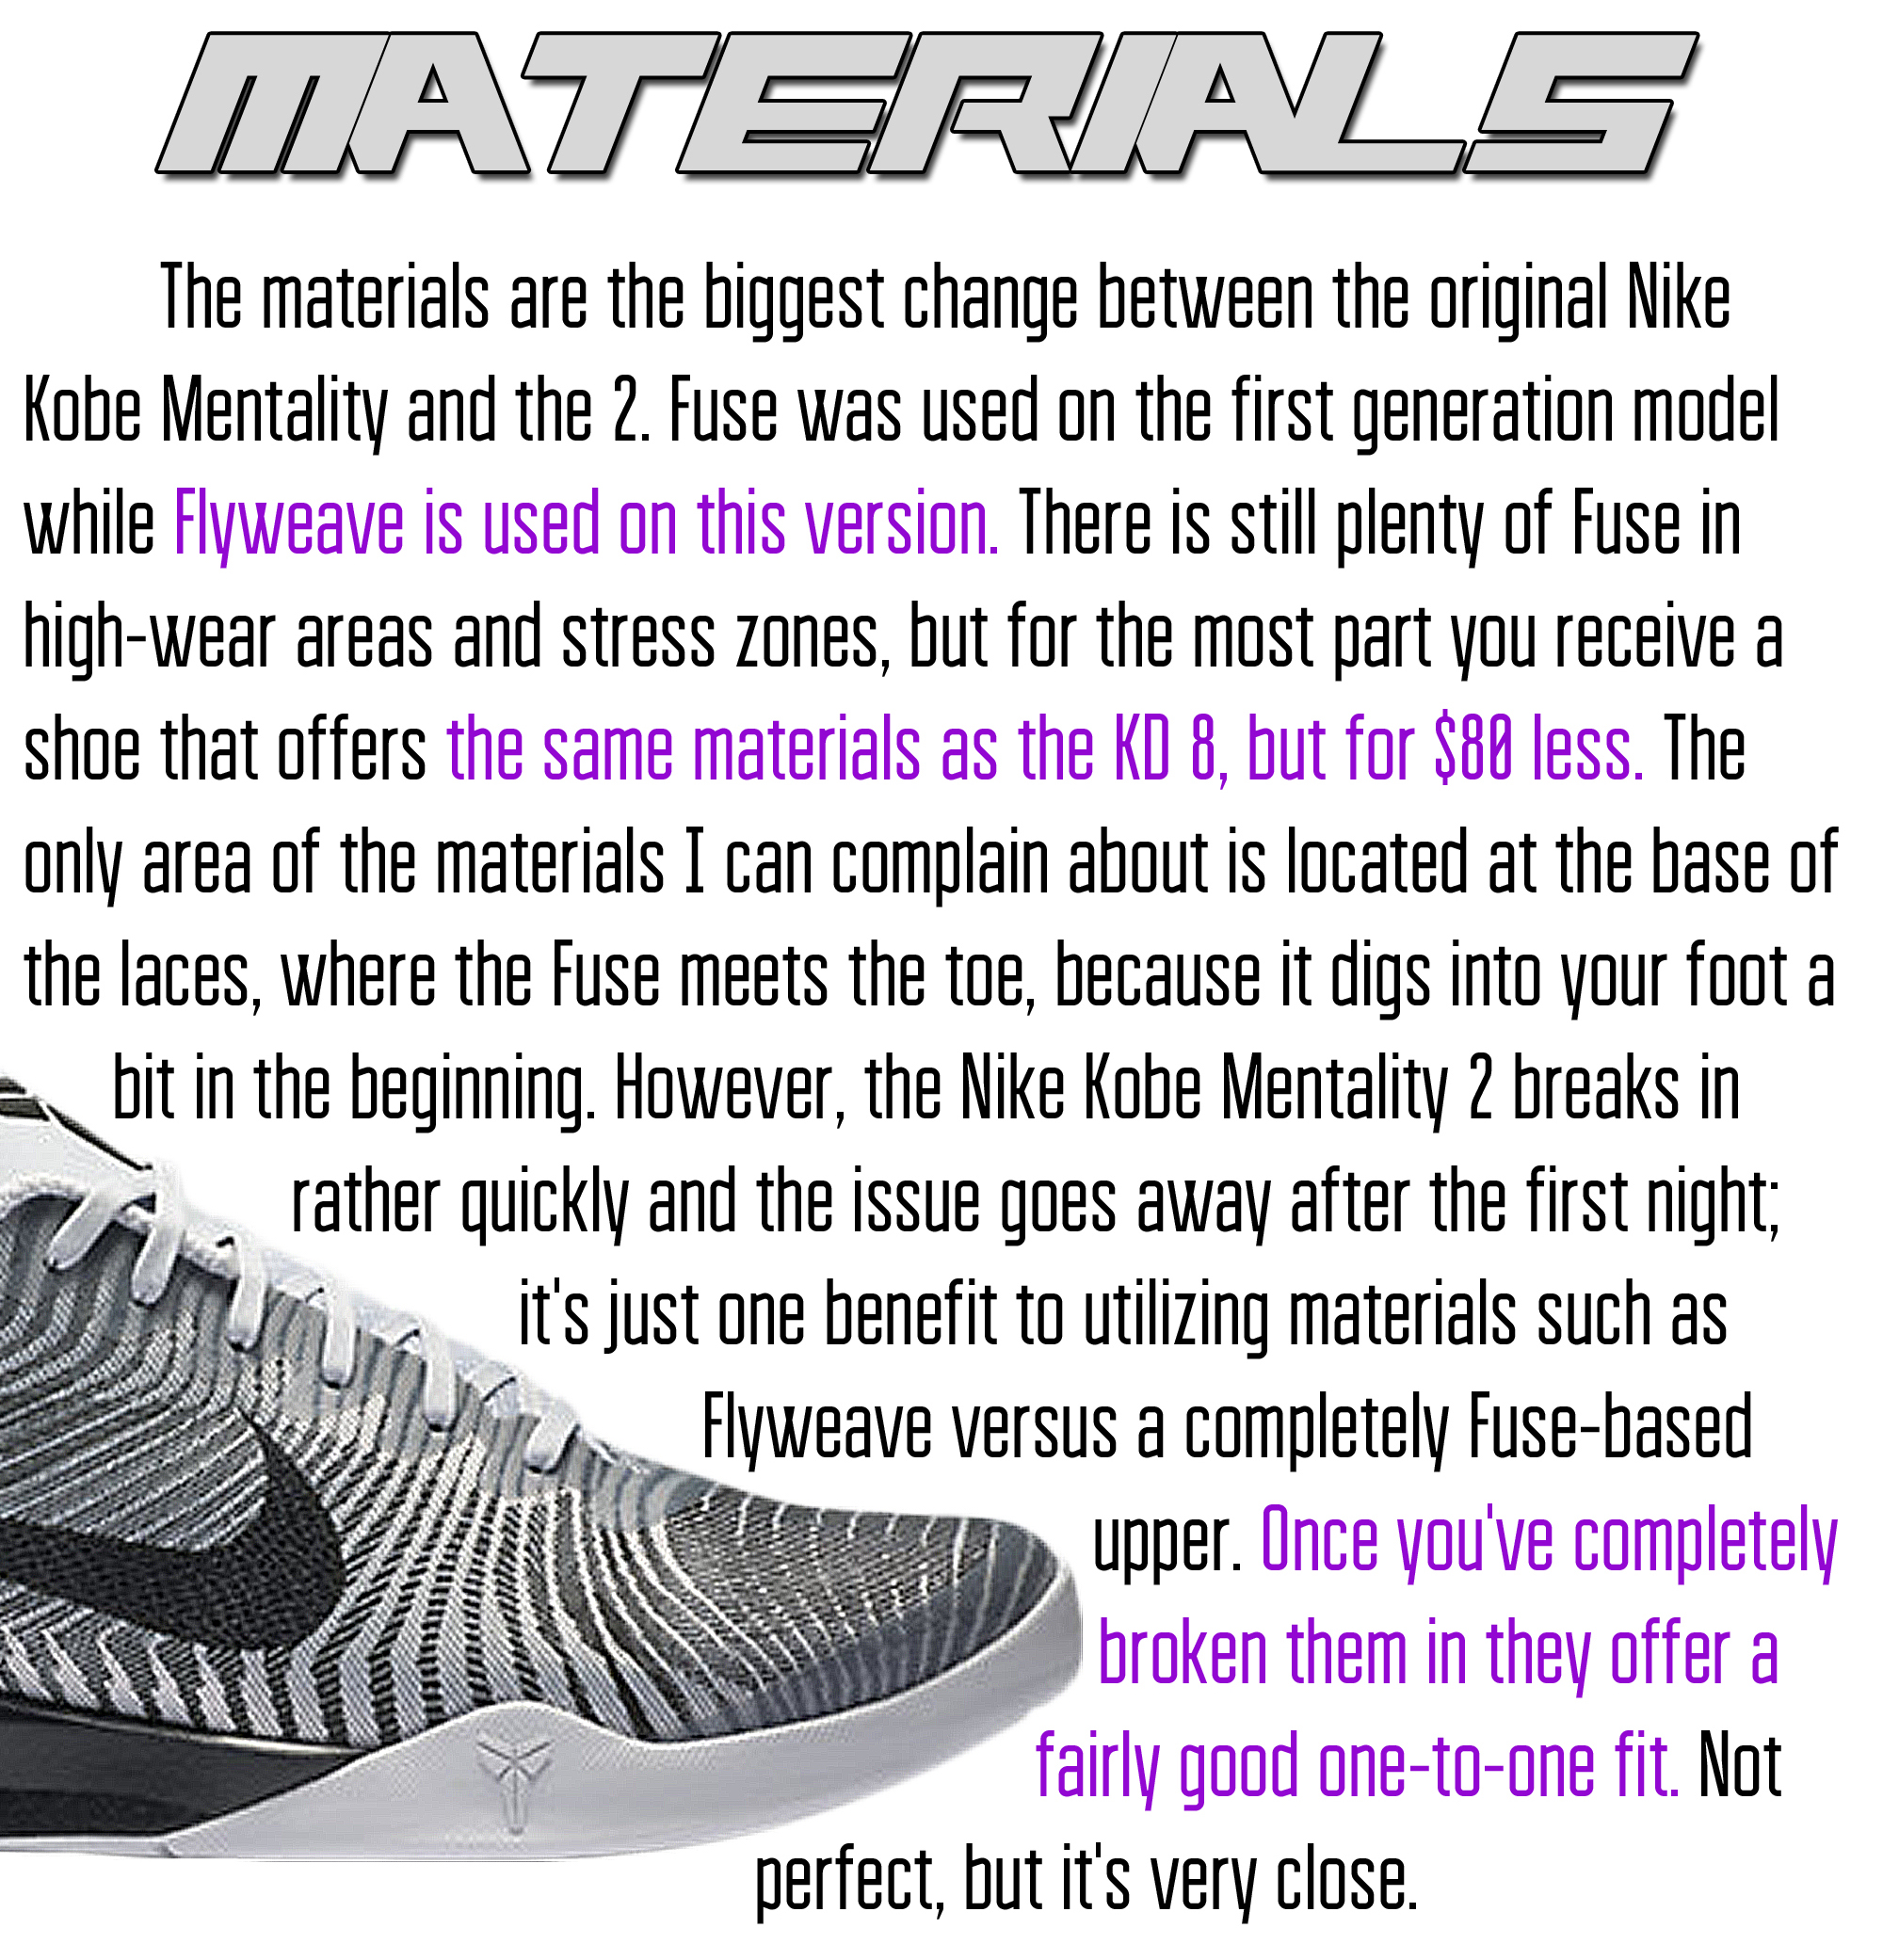 Mentality 2 - Materials